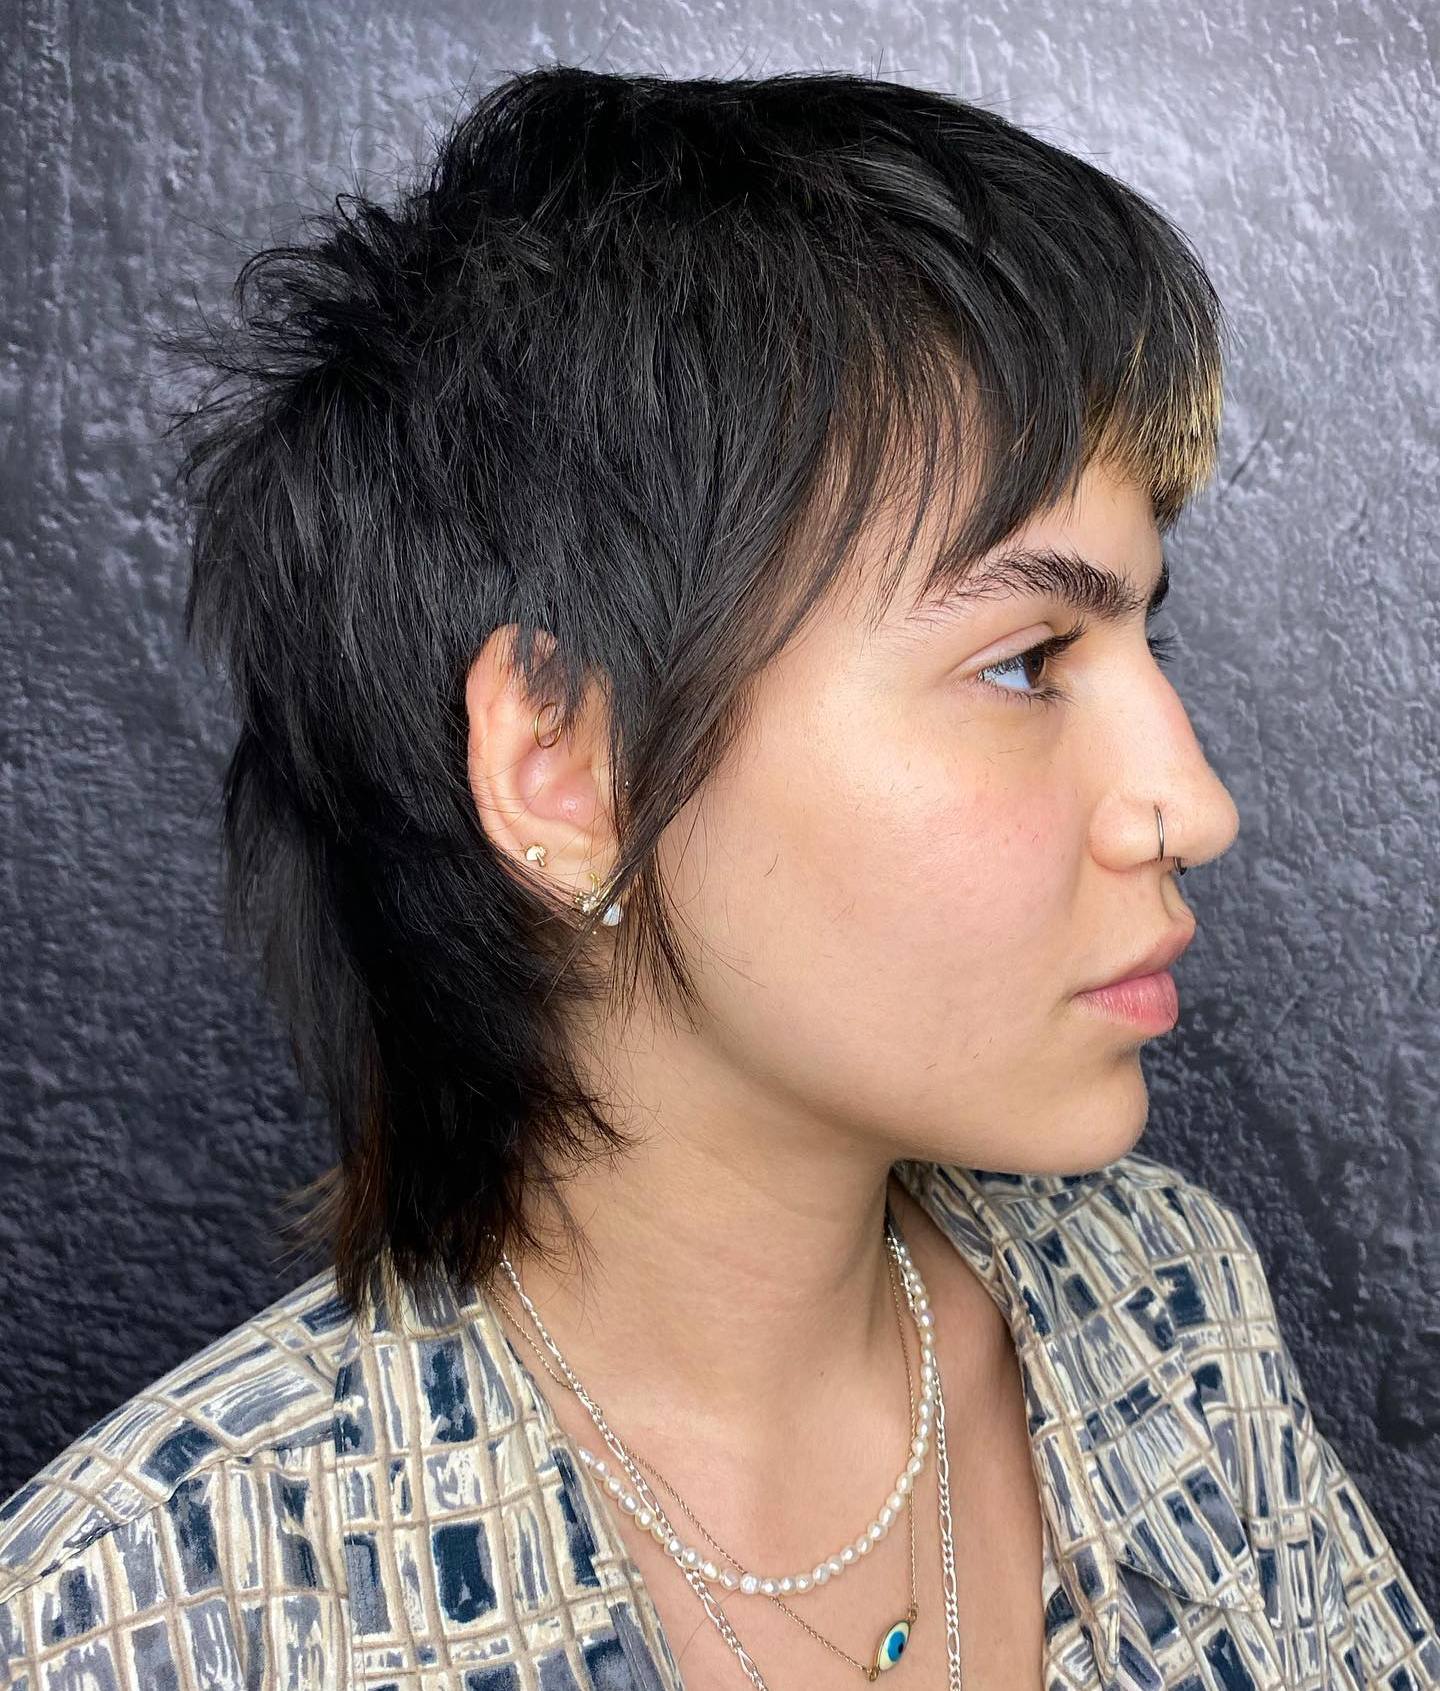 Neck Length Mullet with Feathered Bangs